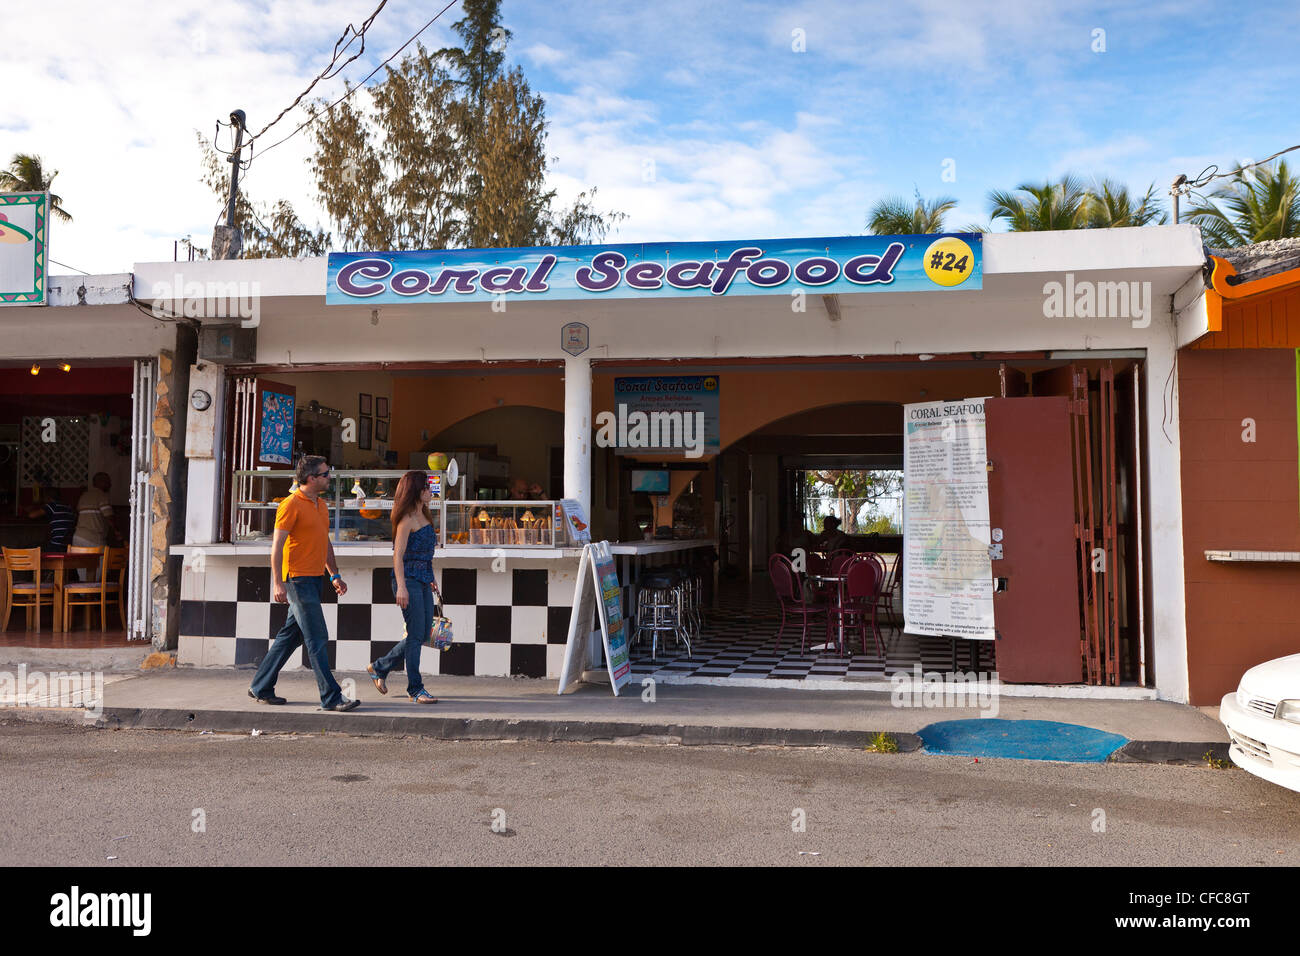 LUQUILLO, PUERTO RICO - Kiosk restaurants with typical fried snack foods. Stock Photo